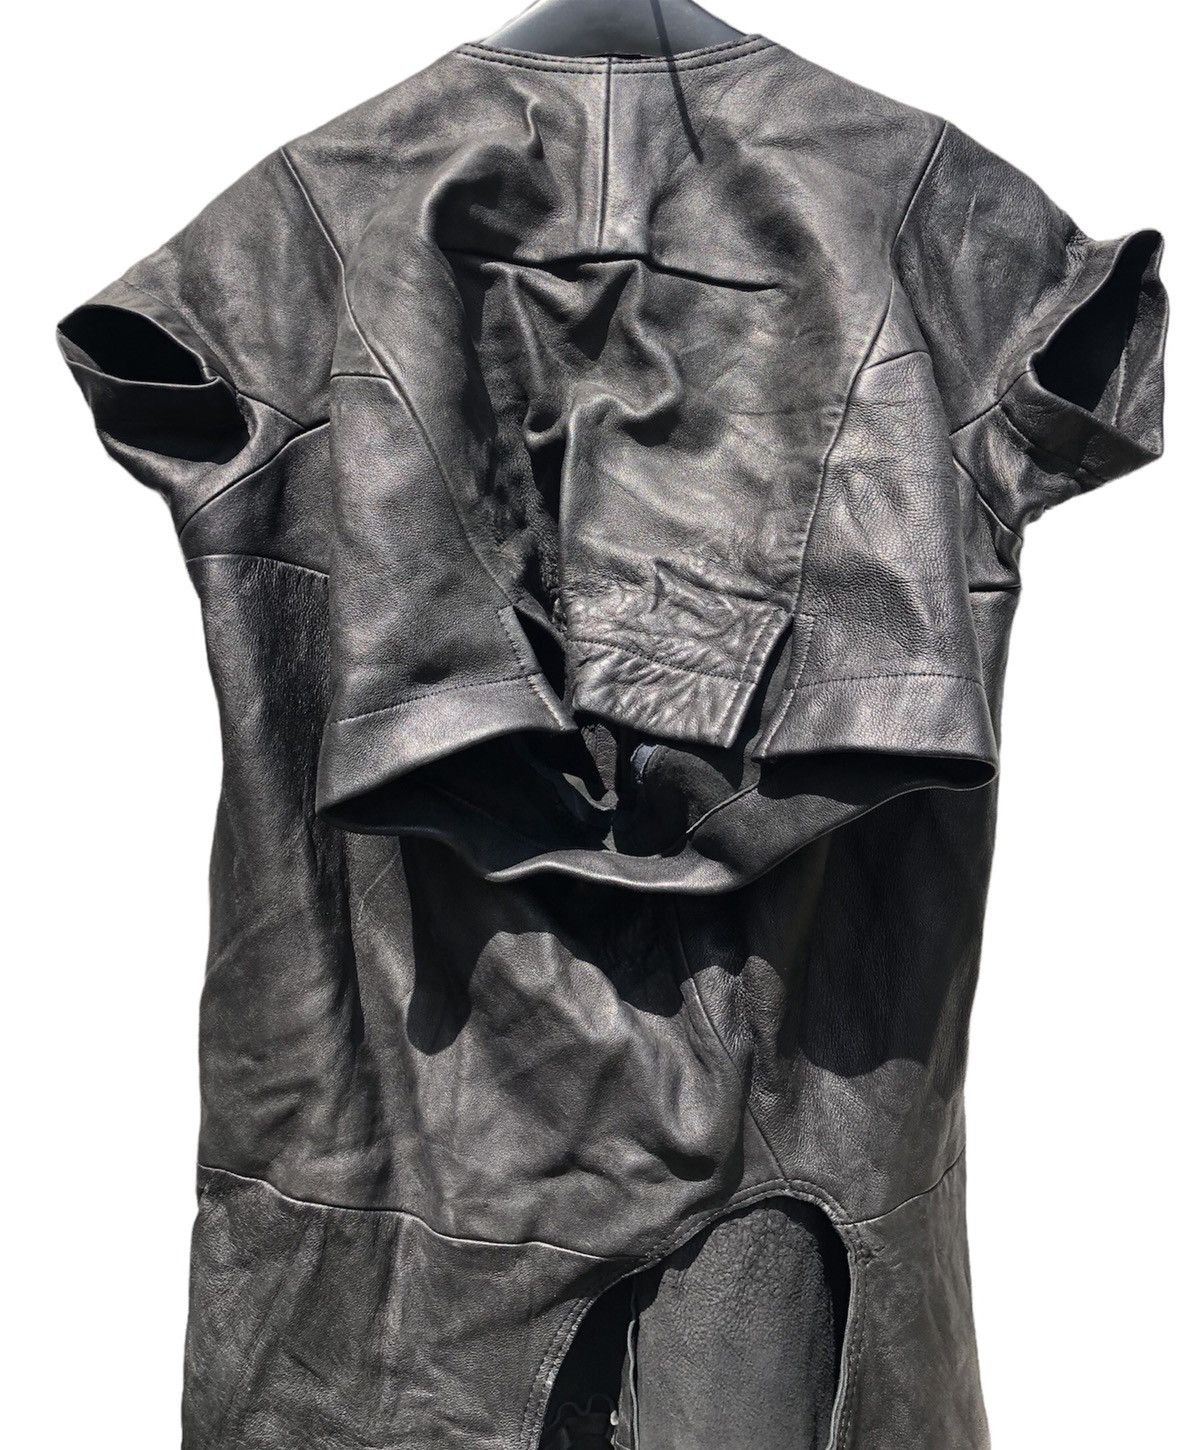 ARCHIVED JUNYA WATANABE AD 1996 PATCH MUTTON LEATHER DRESS - 8